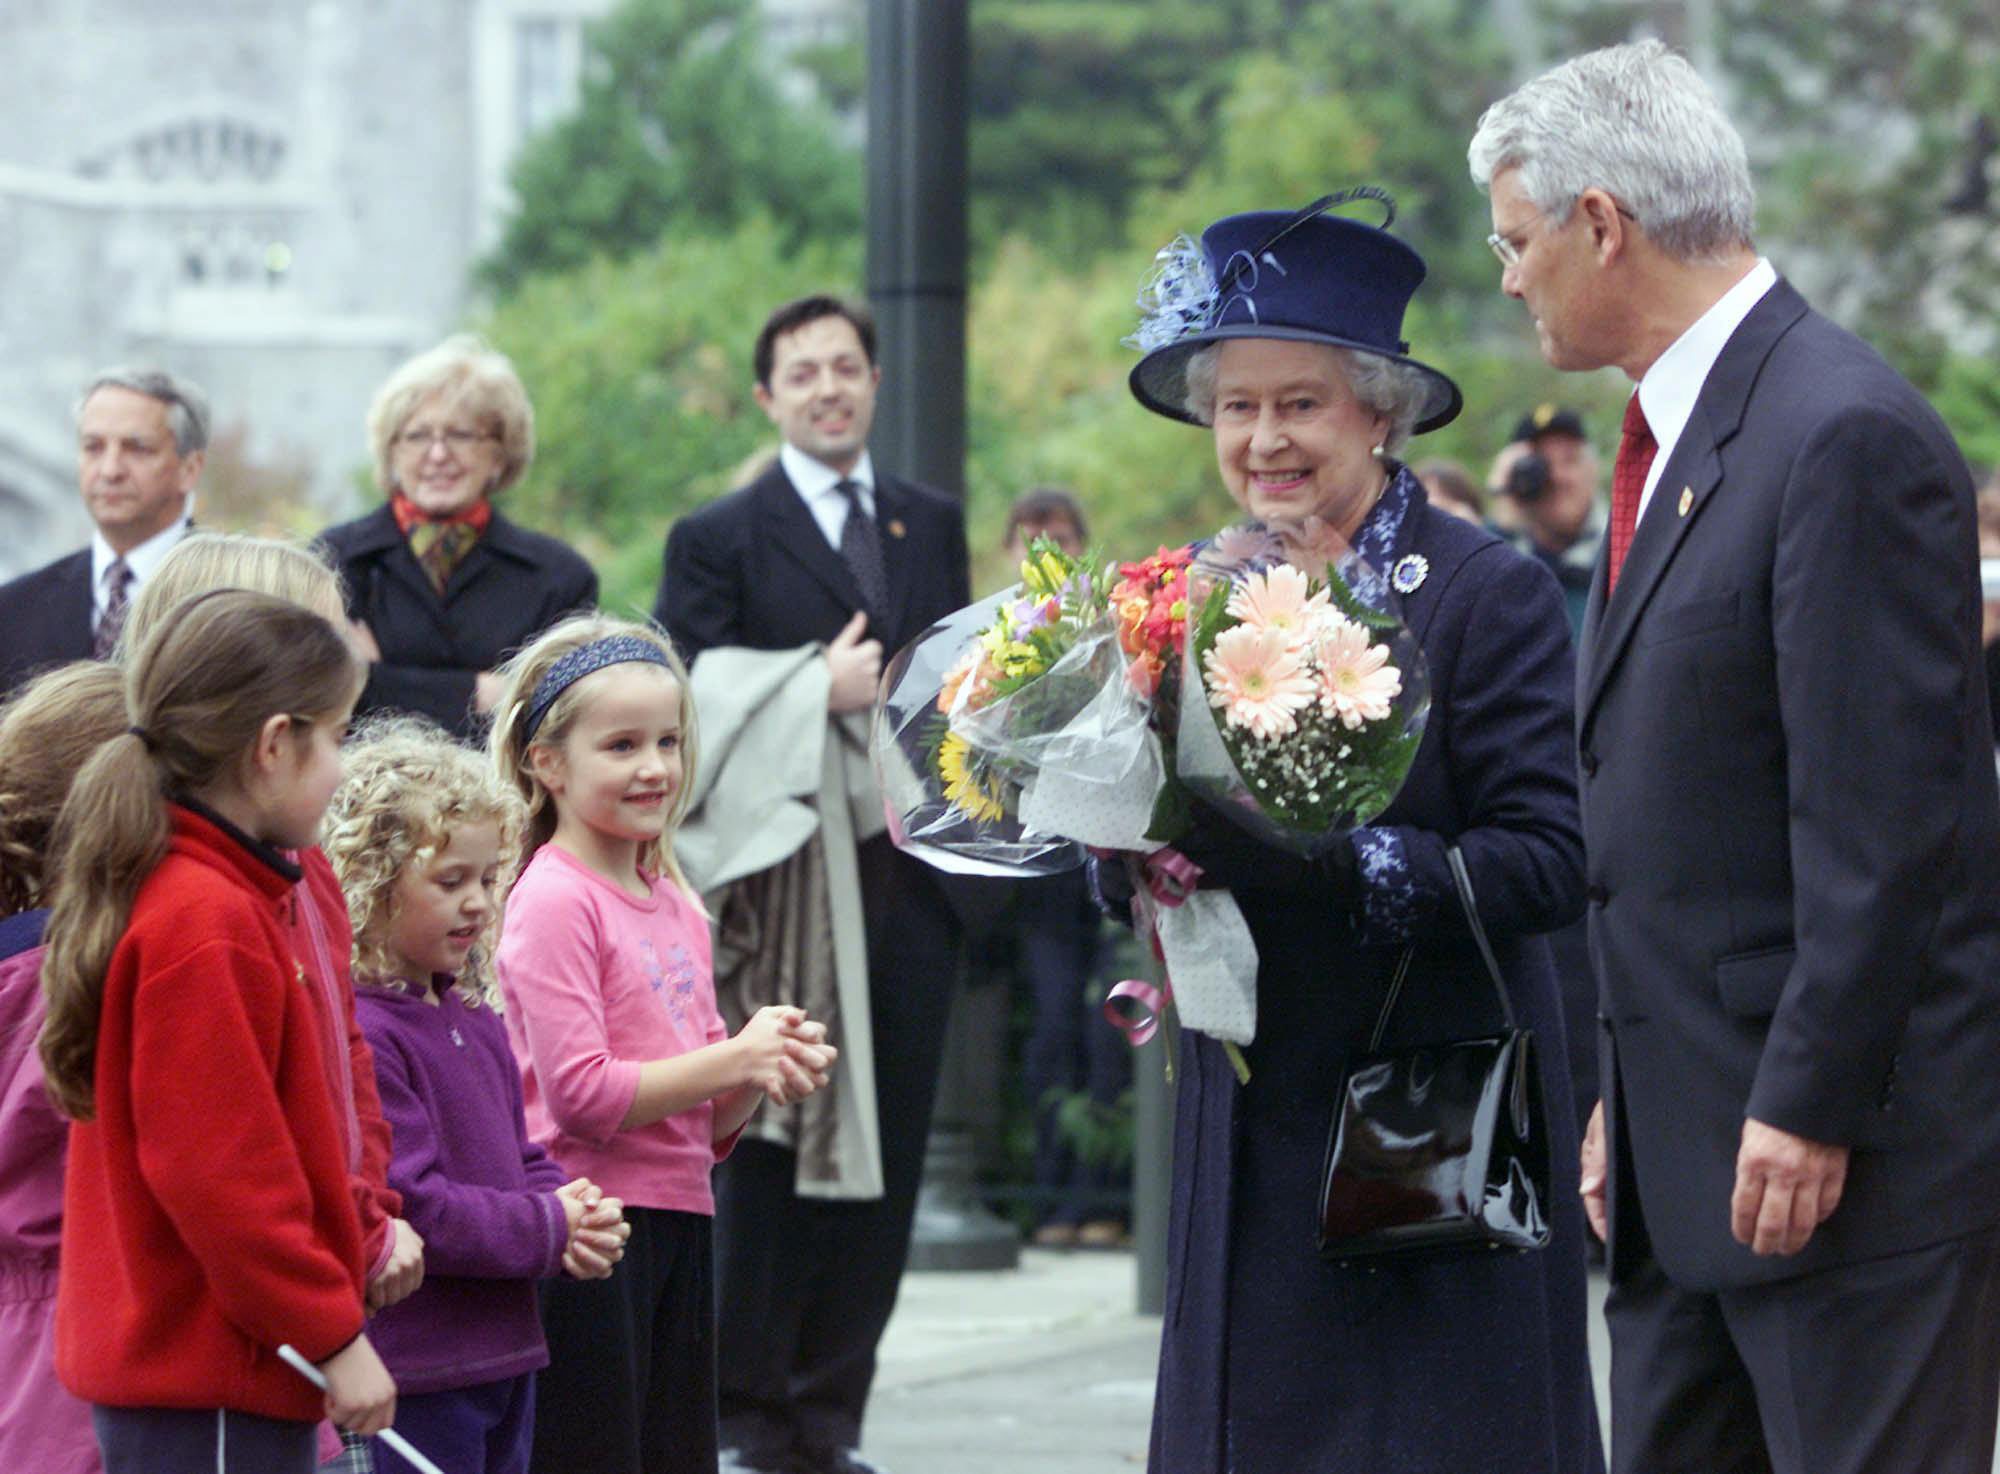 Queen Elizabeth’s death reminder of fading WWII generation: ‘Time is moving relentlessly’